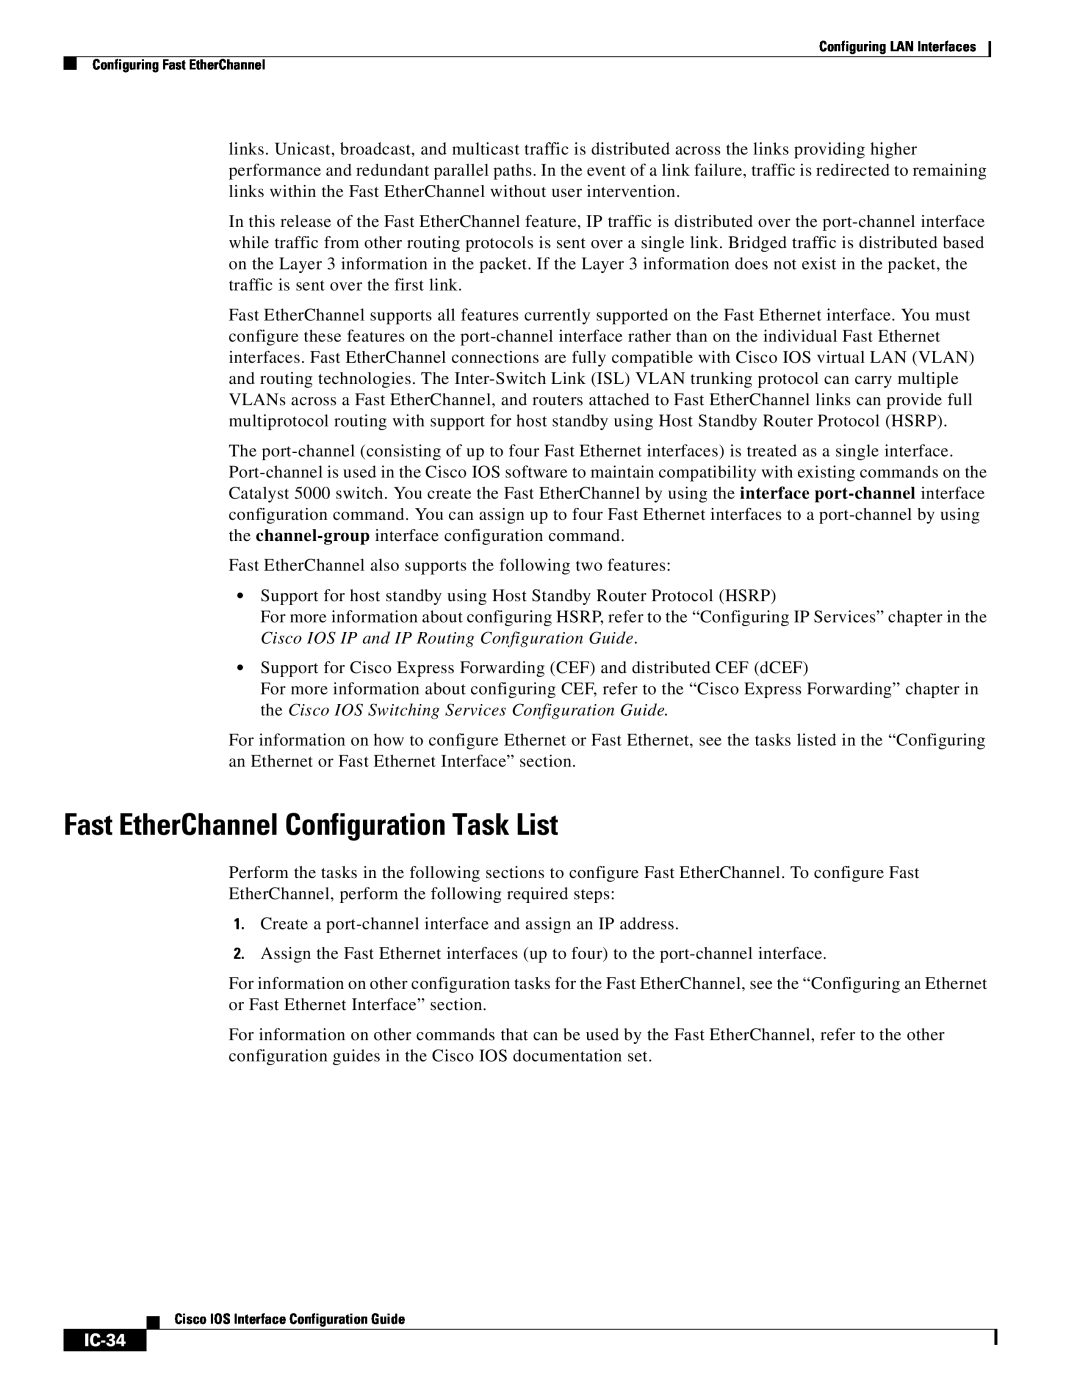 Cisco Systems IC-23 manual Fast EtherChannel Configuration Task List, IC-34 